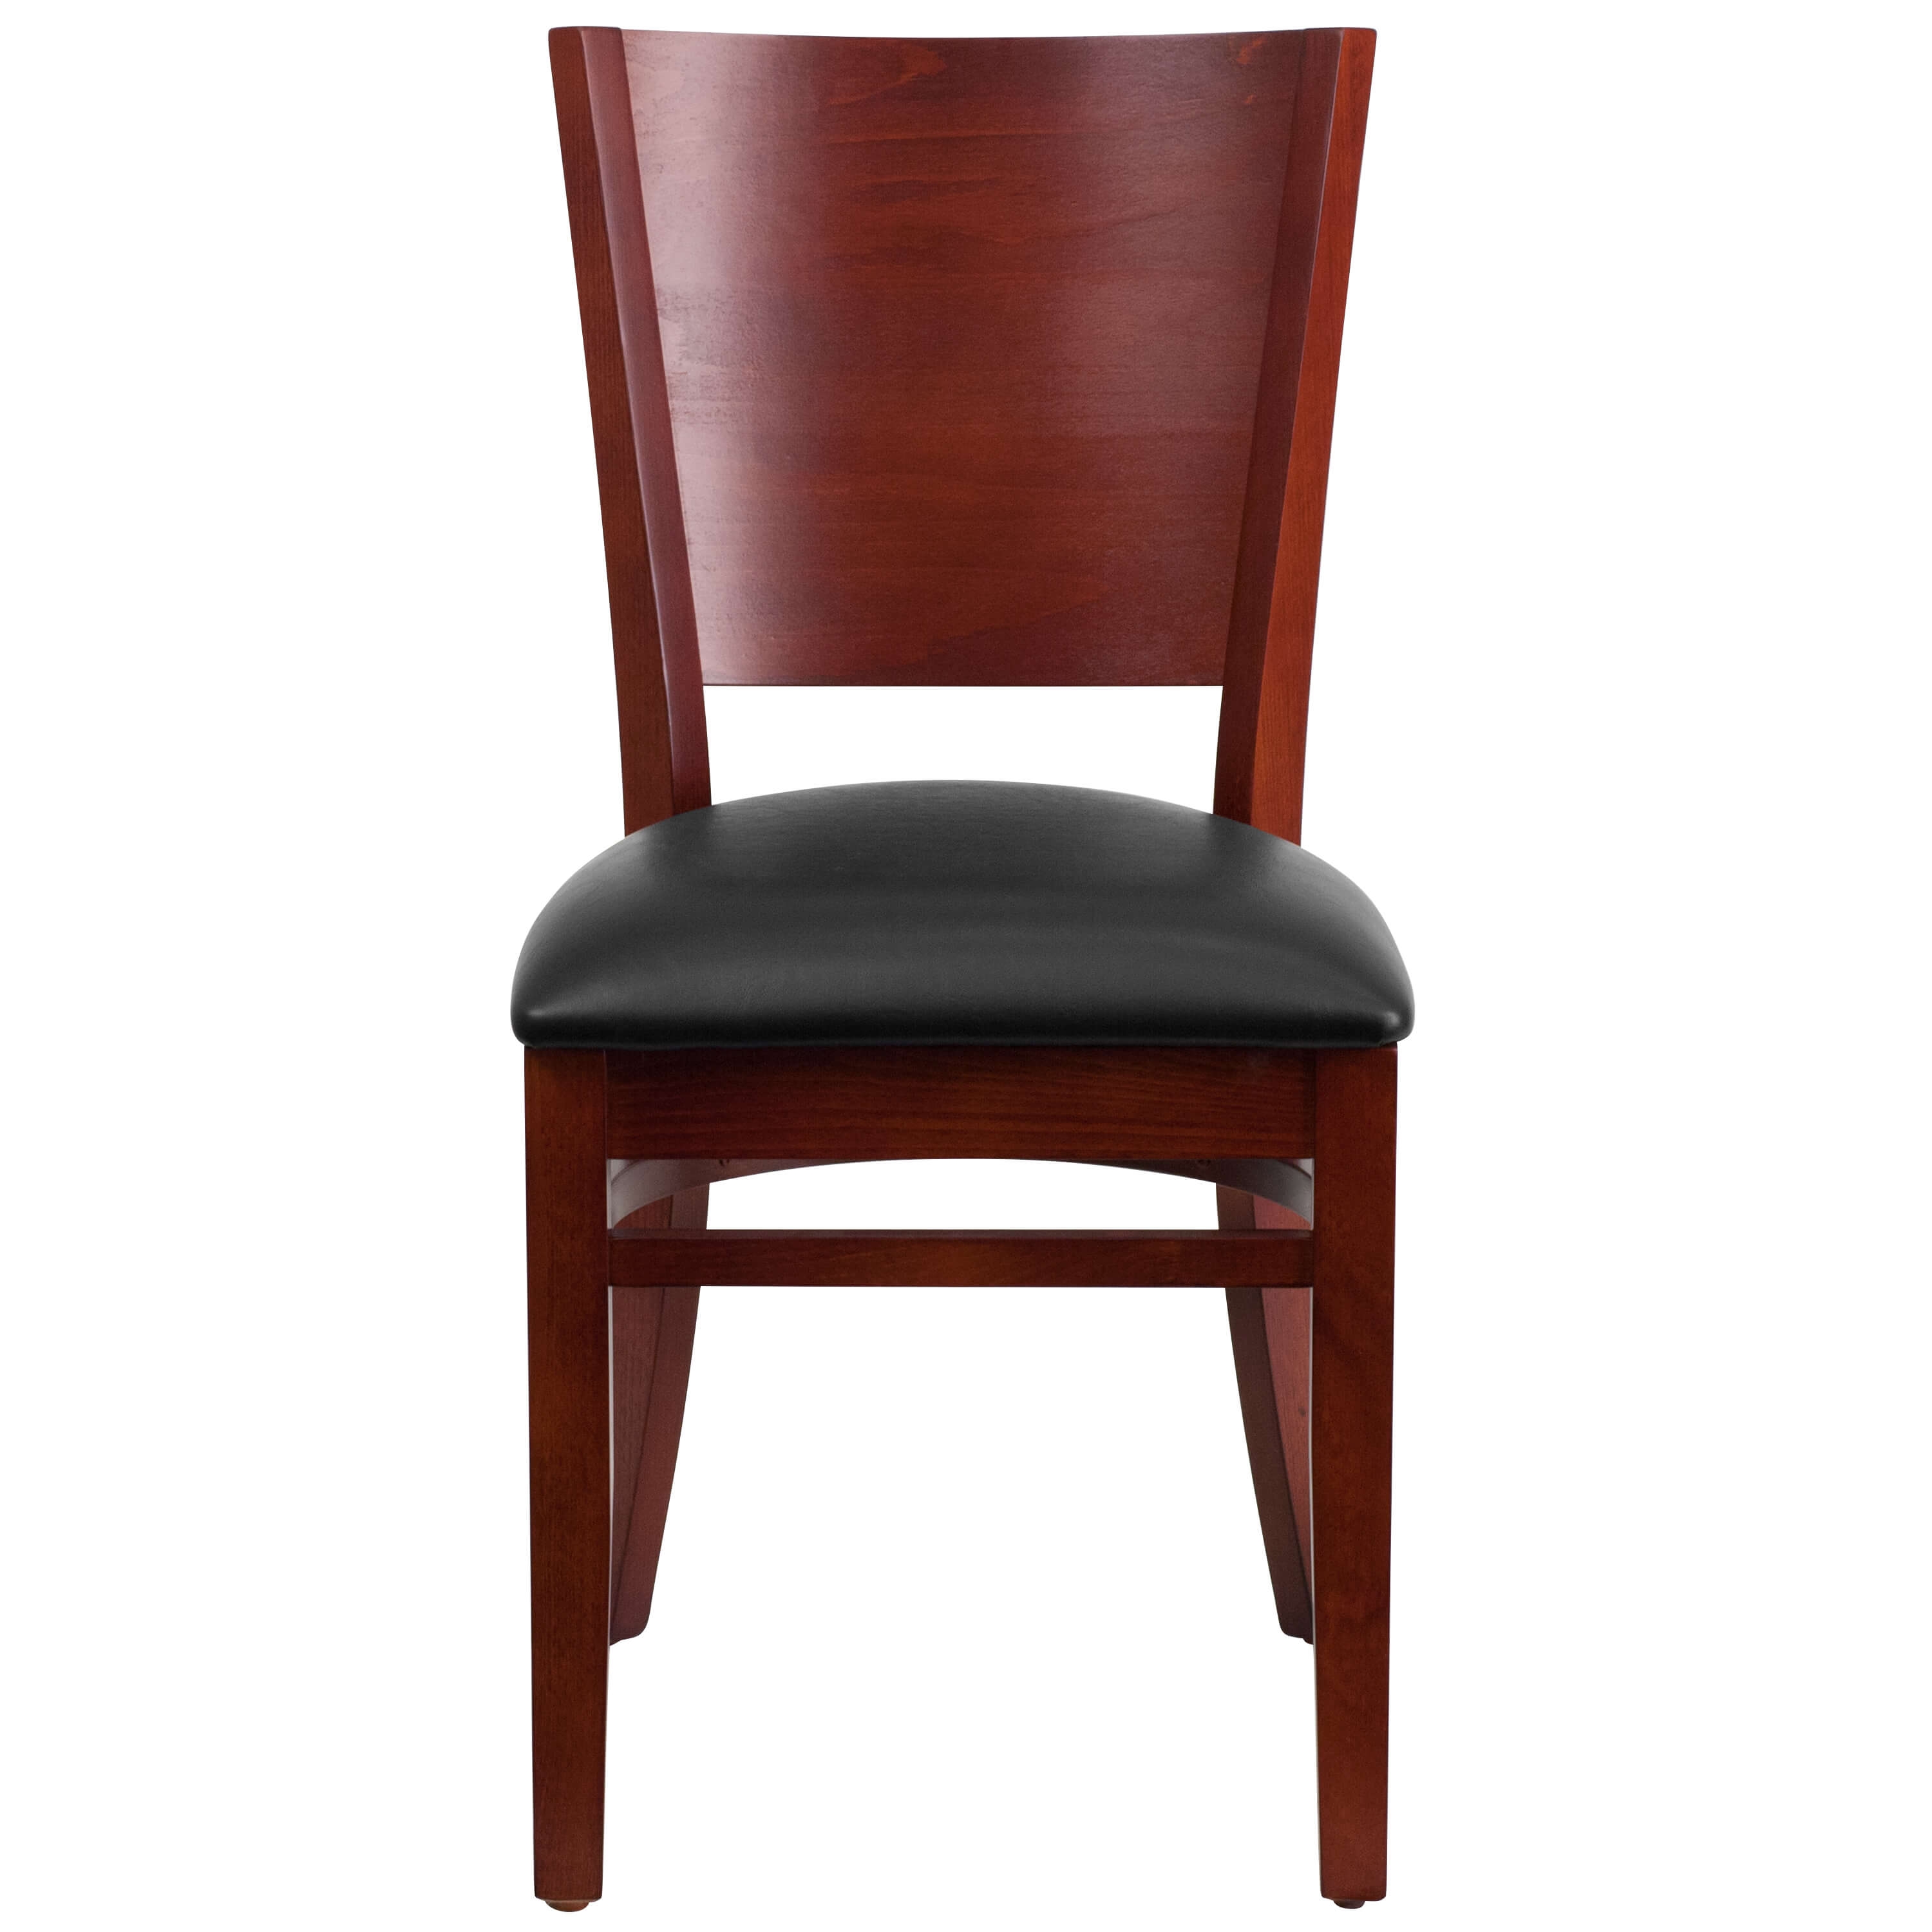 Solid wood dining chairs front view